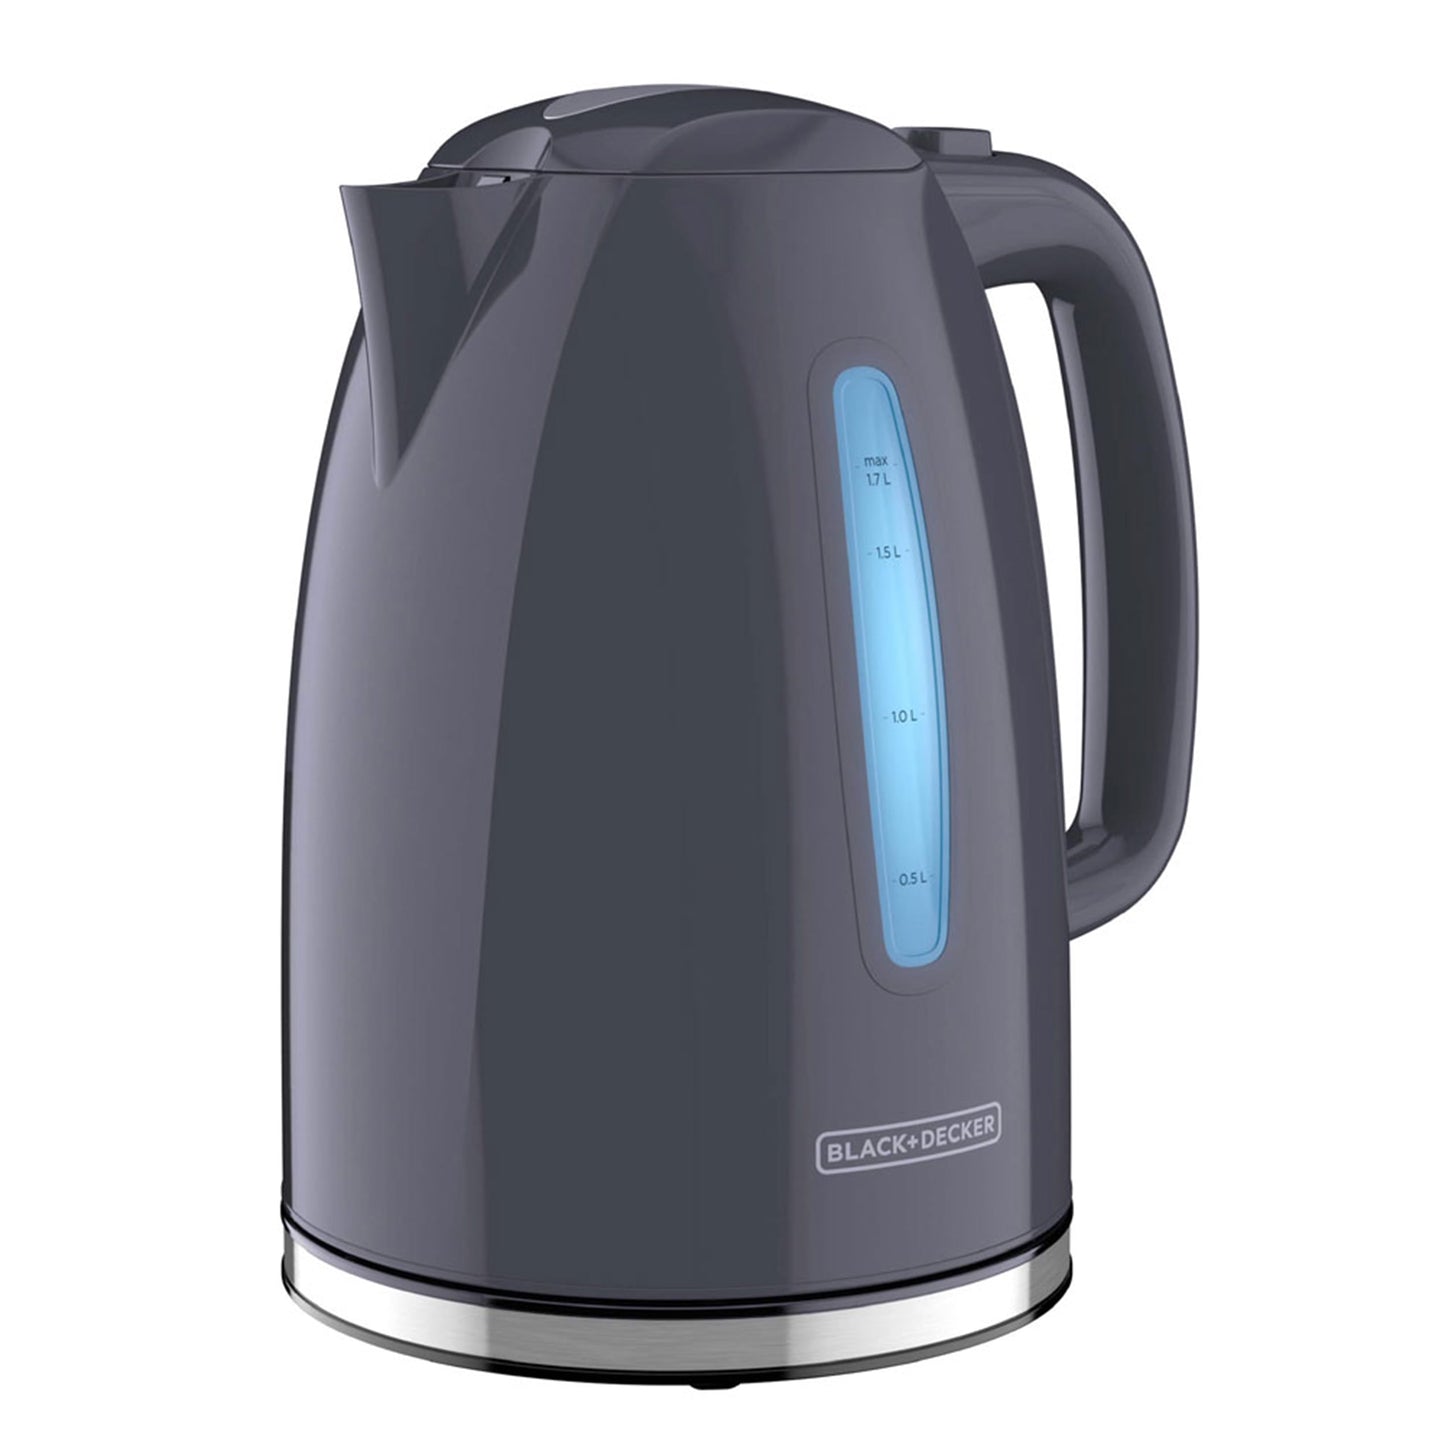 Black and Decker Rapid Boil 7 Cup Electric Kettle Gray